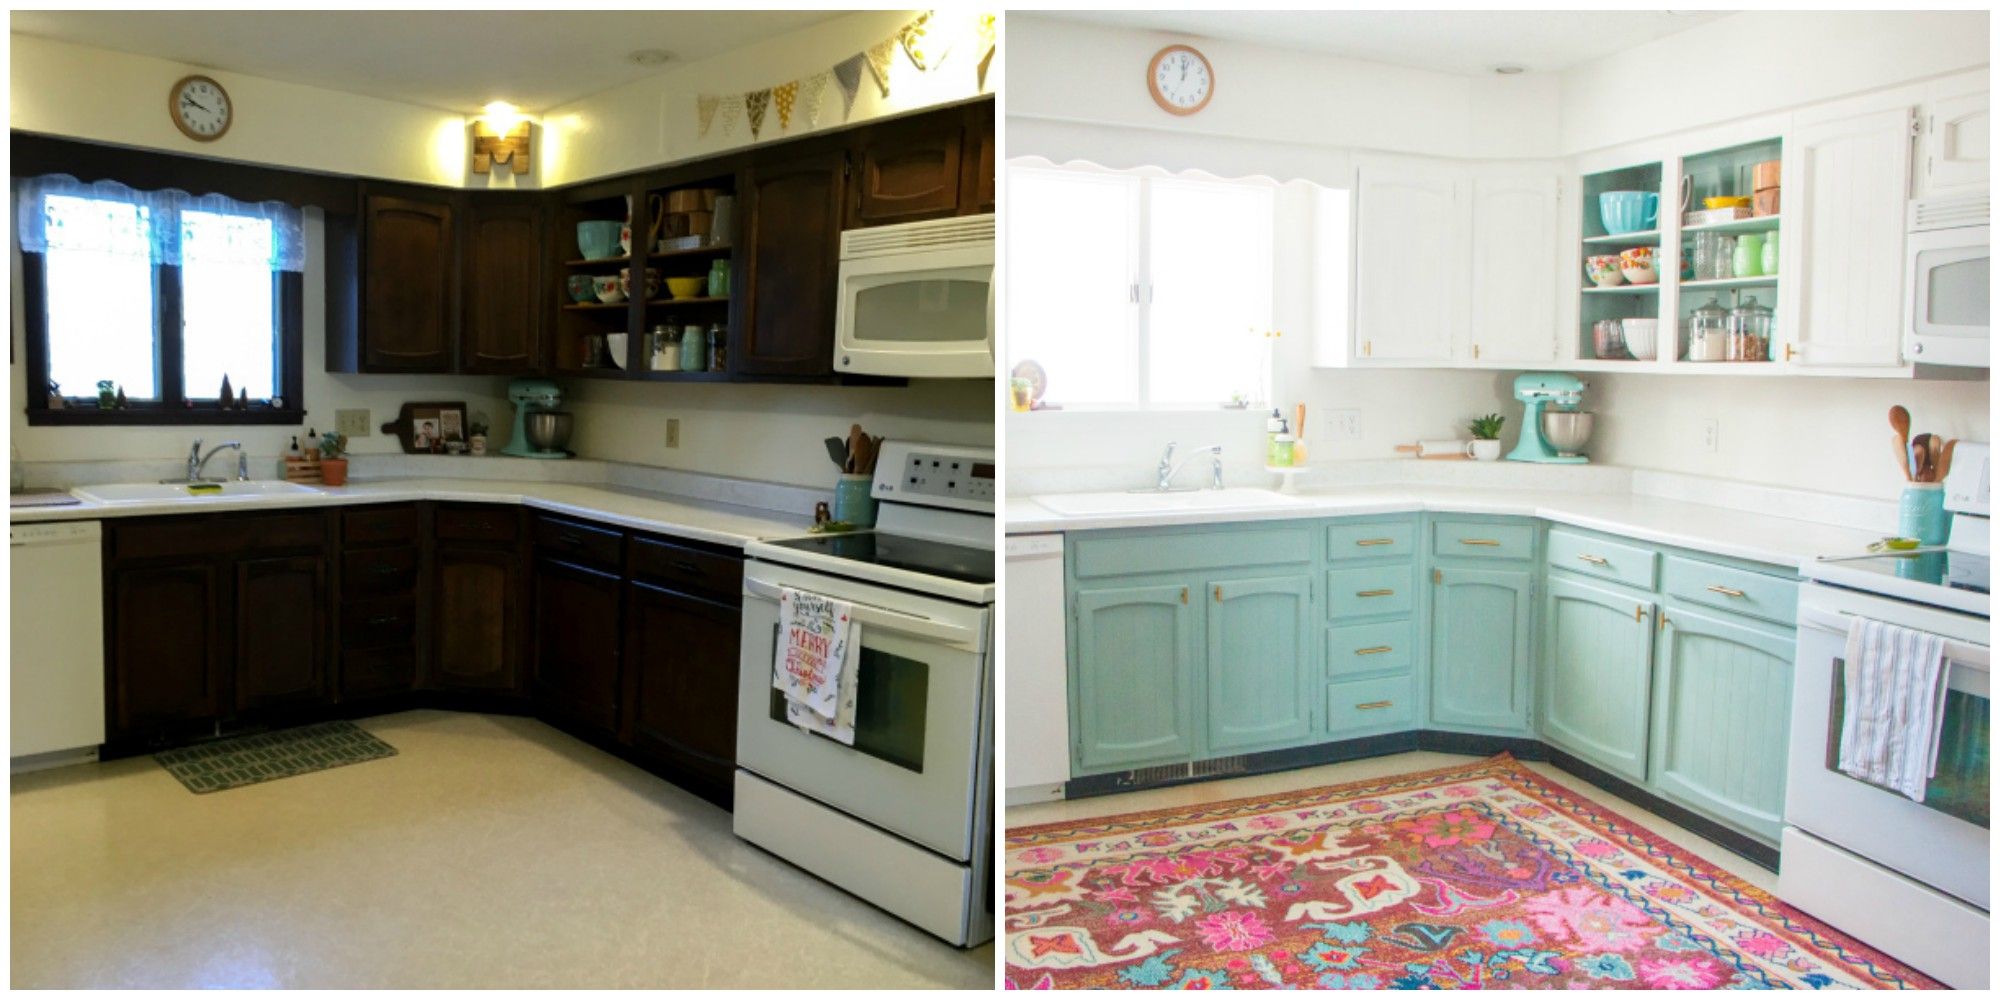 Before & After: A Bright, Affordable DIY Kitchen Update